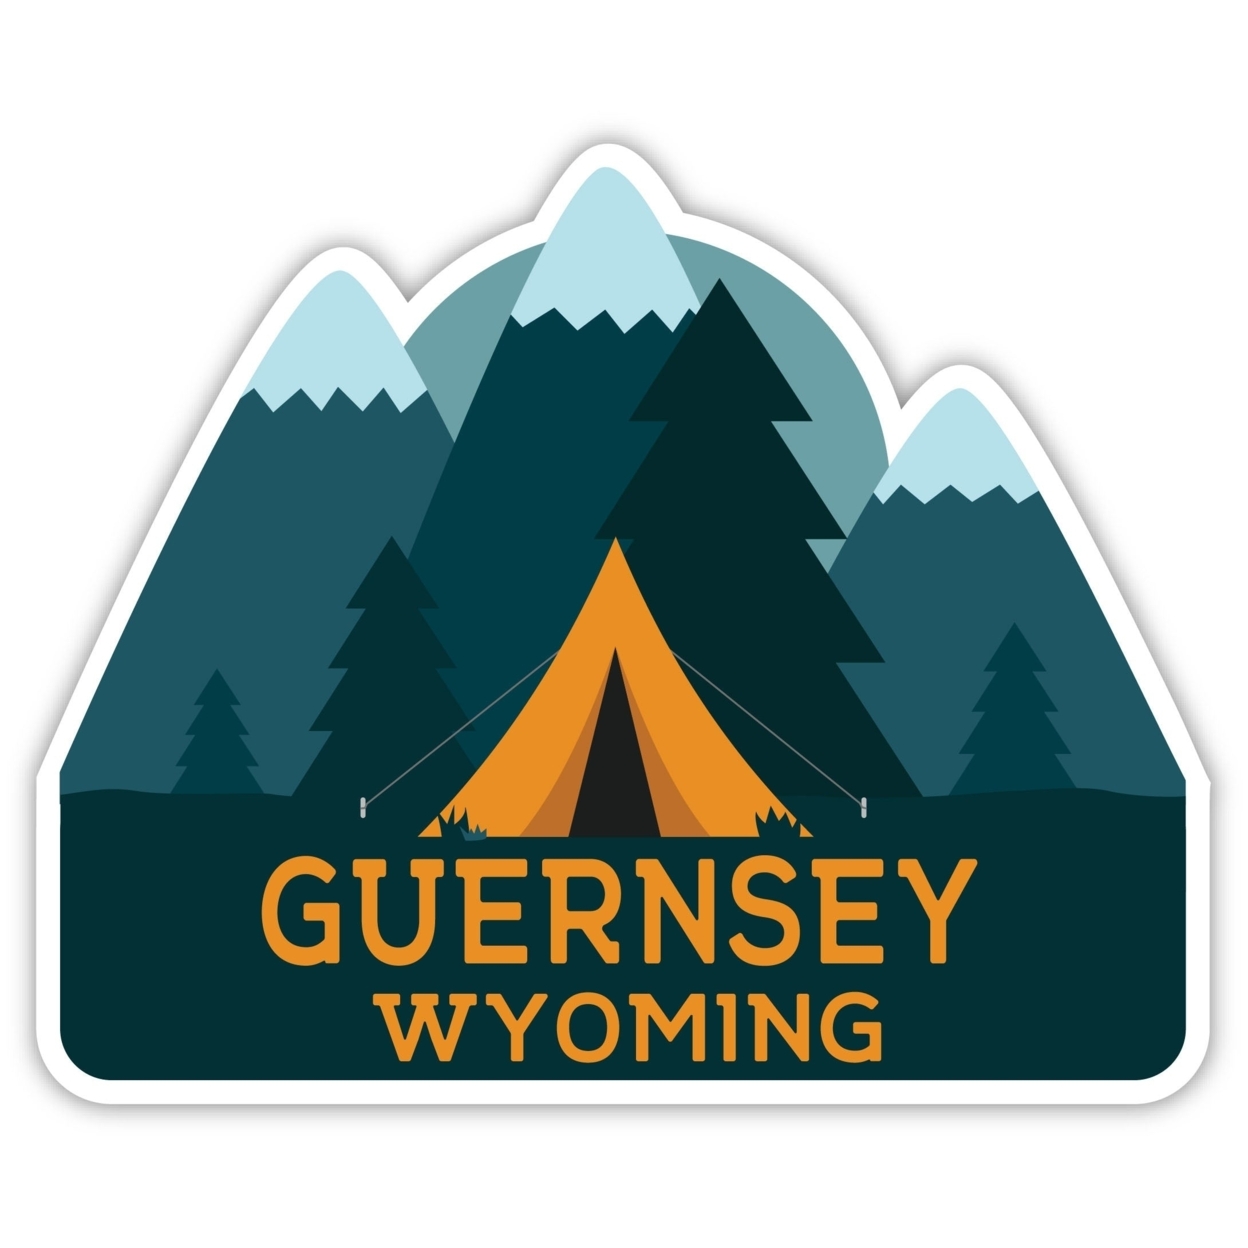 Guernsey Wyoming Souvenir Decorative Stickers (Choose Theme And Size) - 4-Pack, 6-Inch, Tent